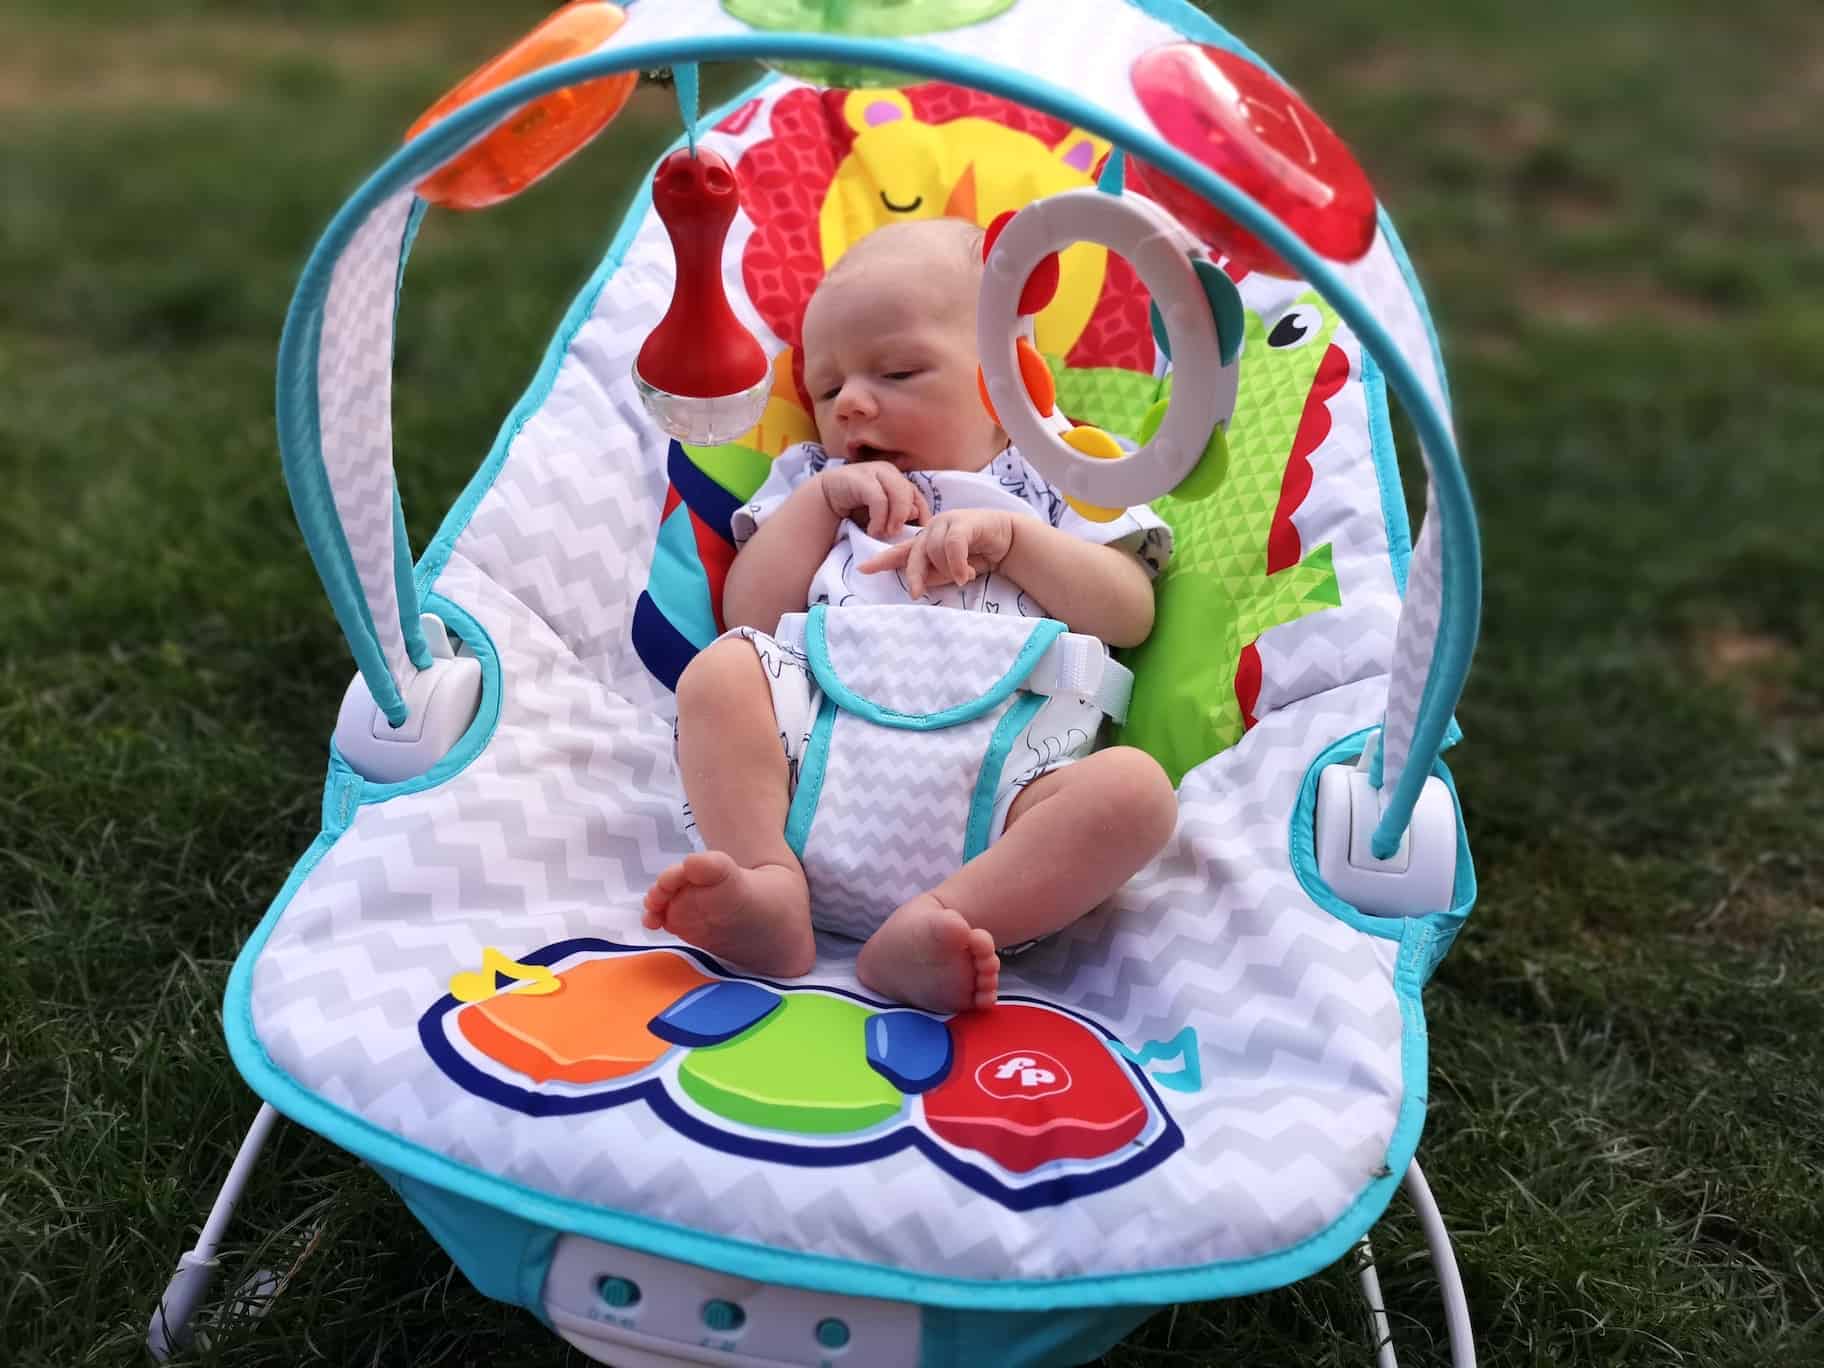 fisher price kick n play musical bouncer